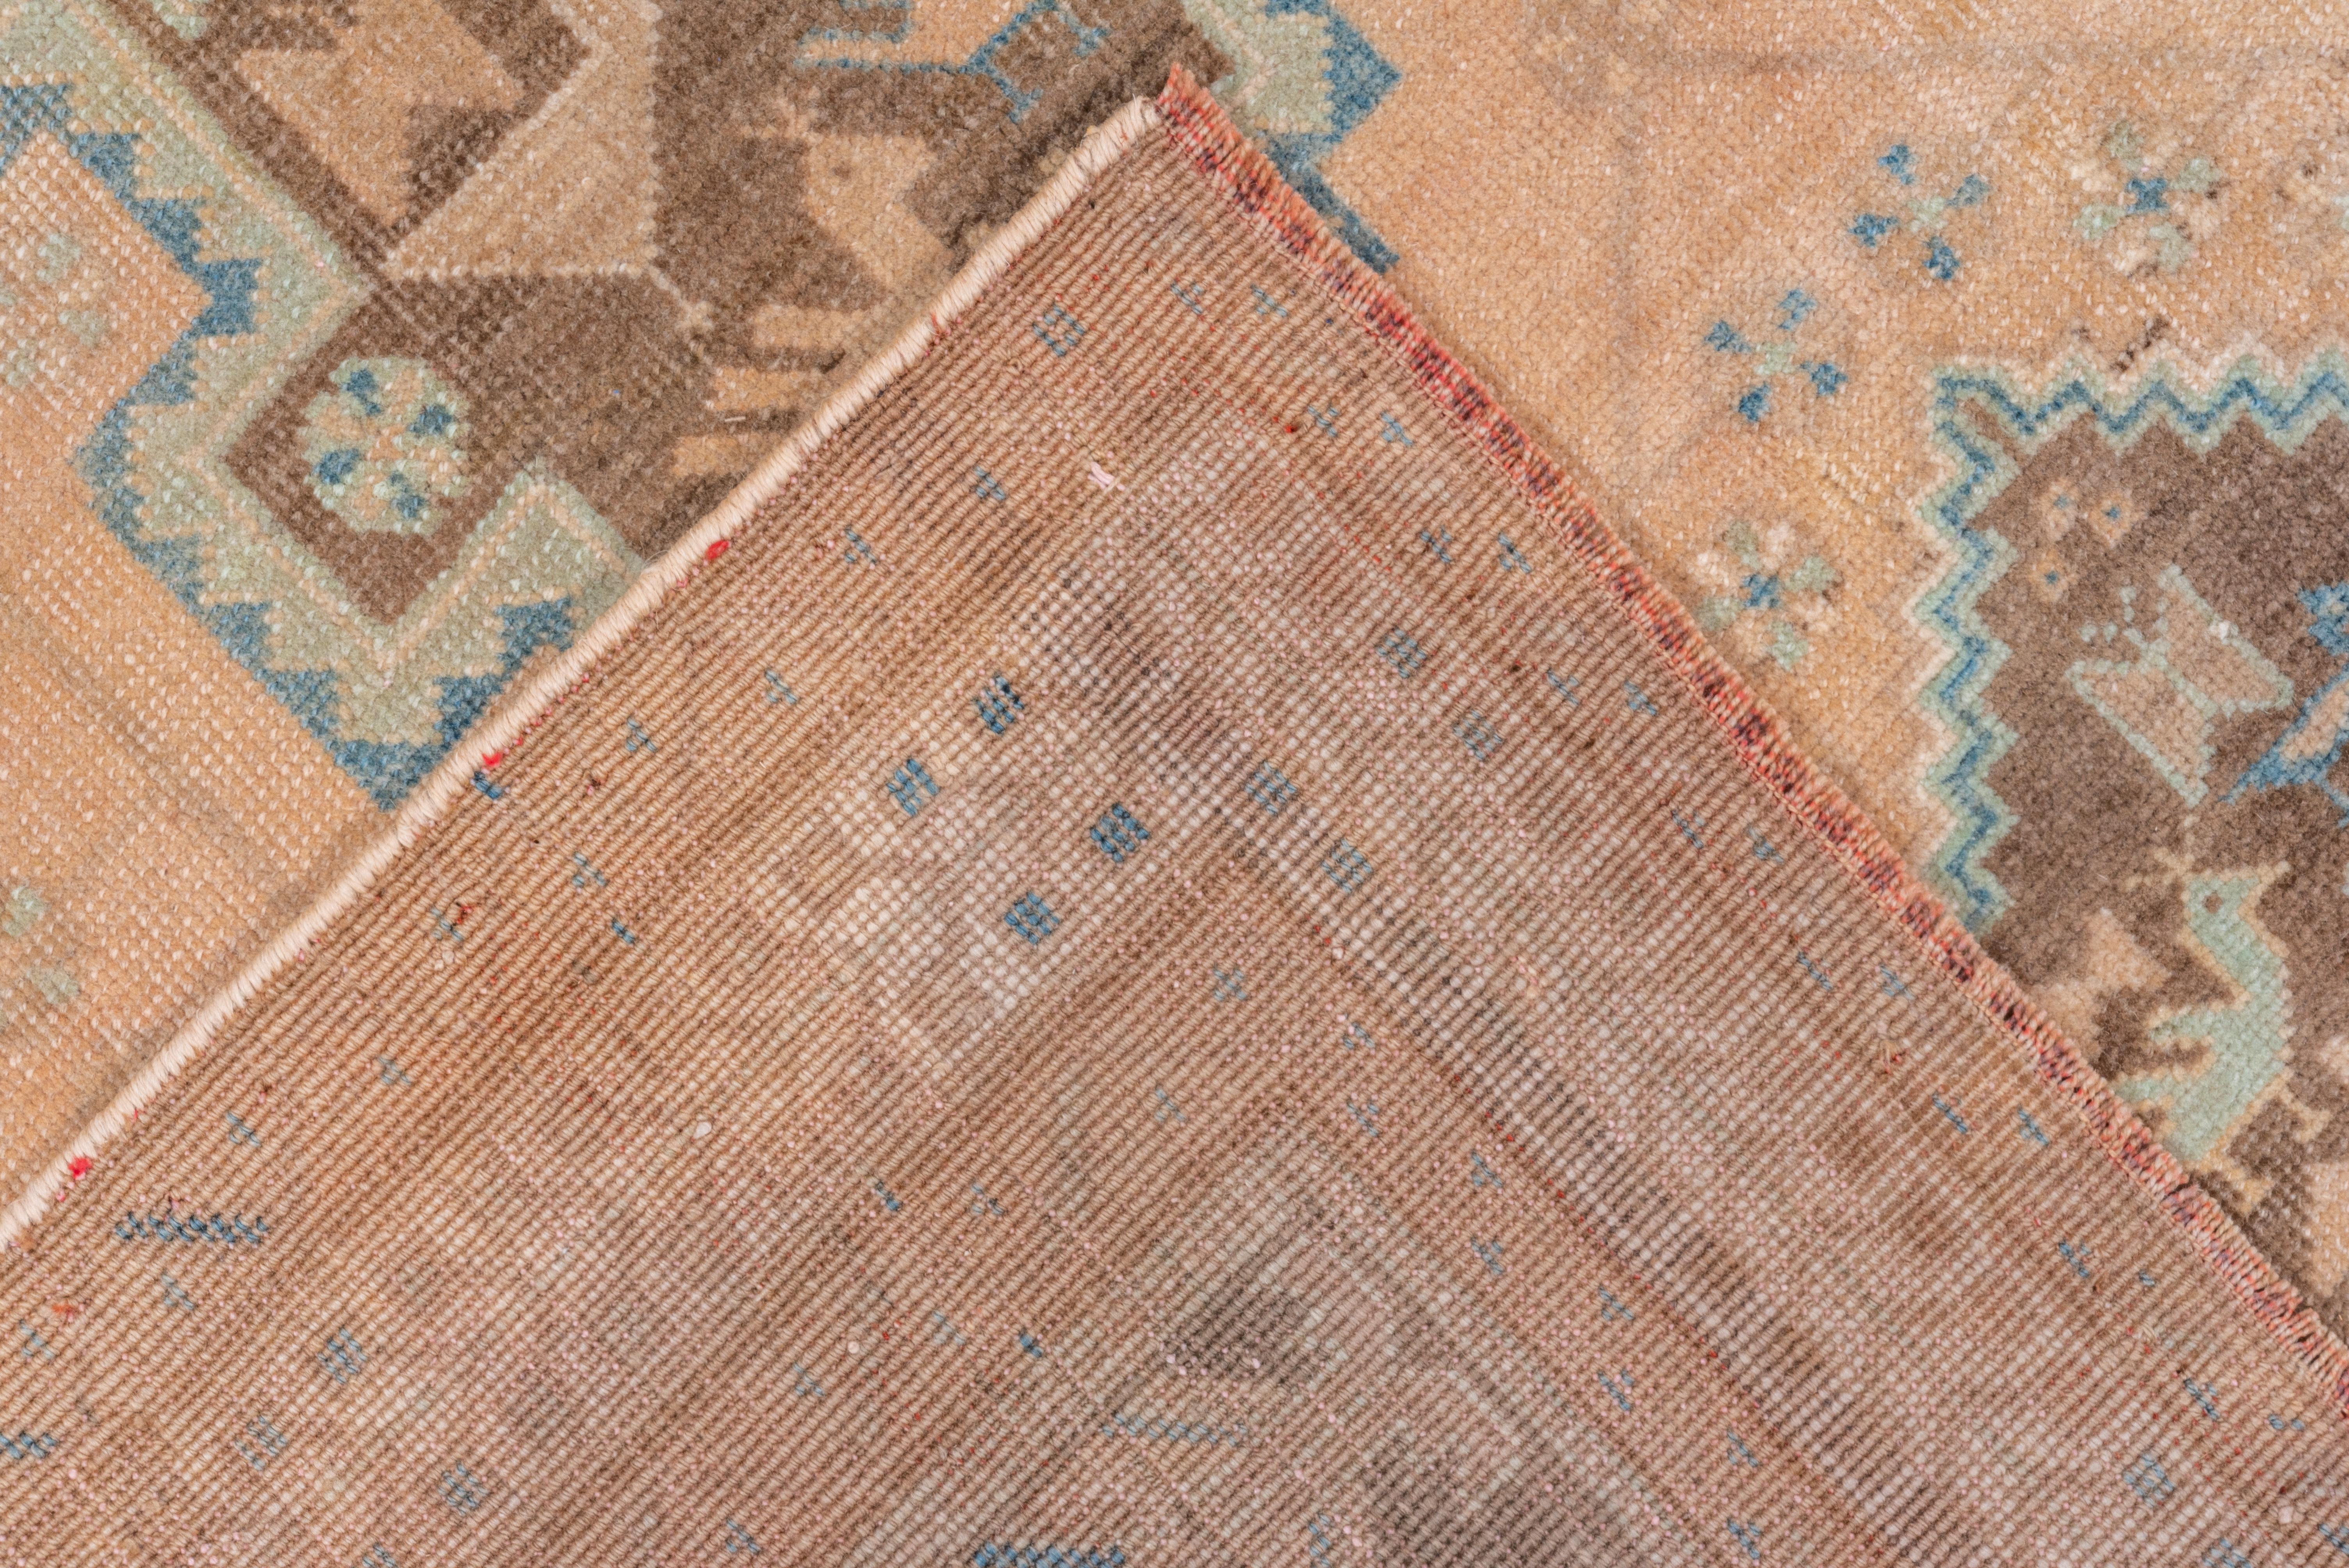 Hand-Knotted Stunning Vintage Persian Afshar Pictoral Rug, Peach, Seafoam & Blue Tones